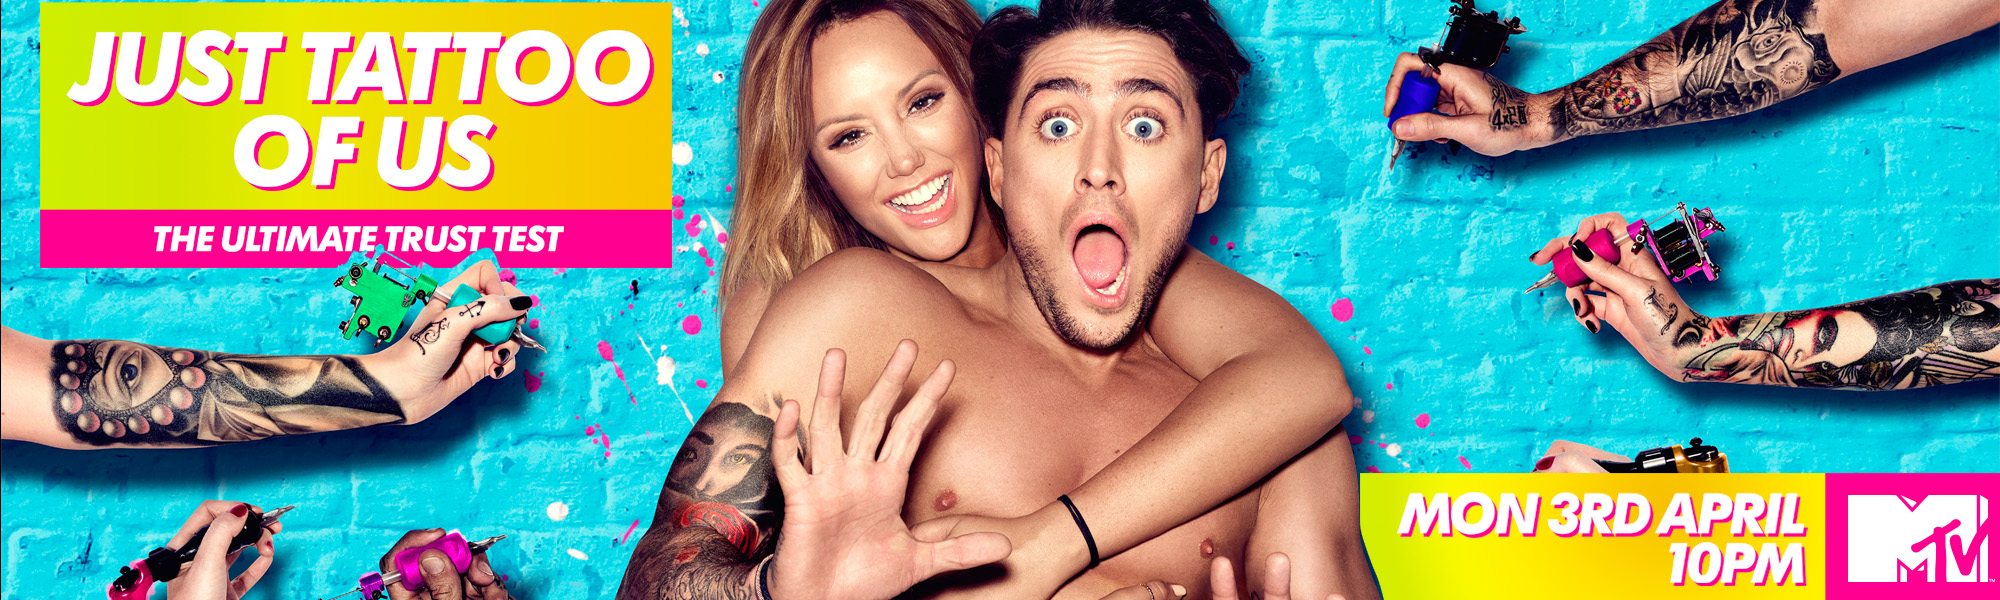 MTV launches brand new show Just Tattoo Of Us, creating the tattoo problems  others have to fix - Charlotte Crosby | The Official Website of Charlotte  Letitia Crosby